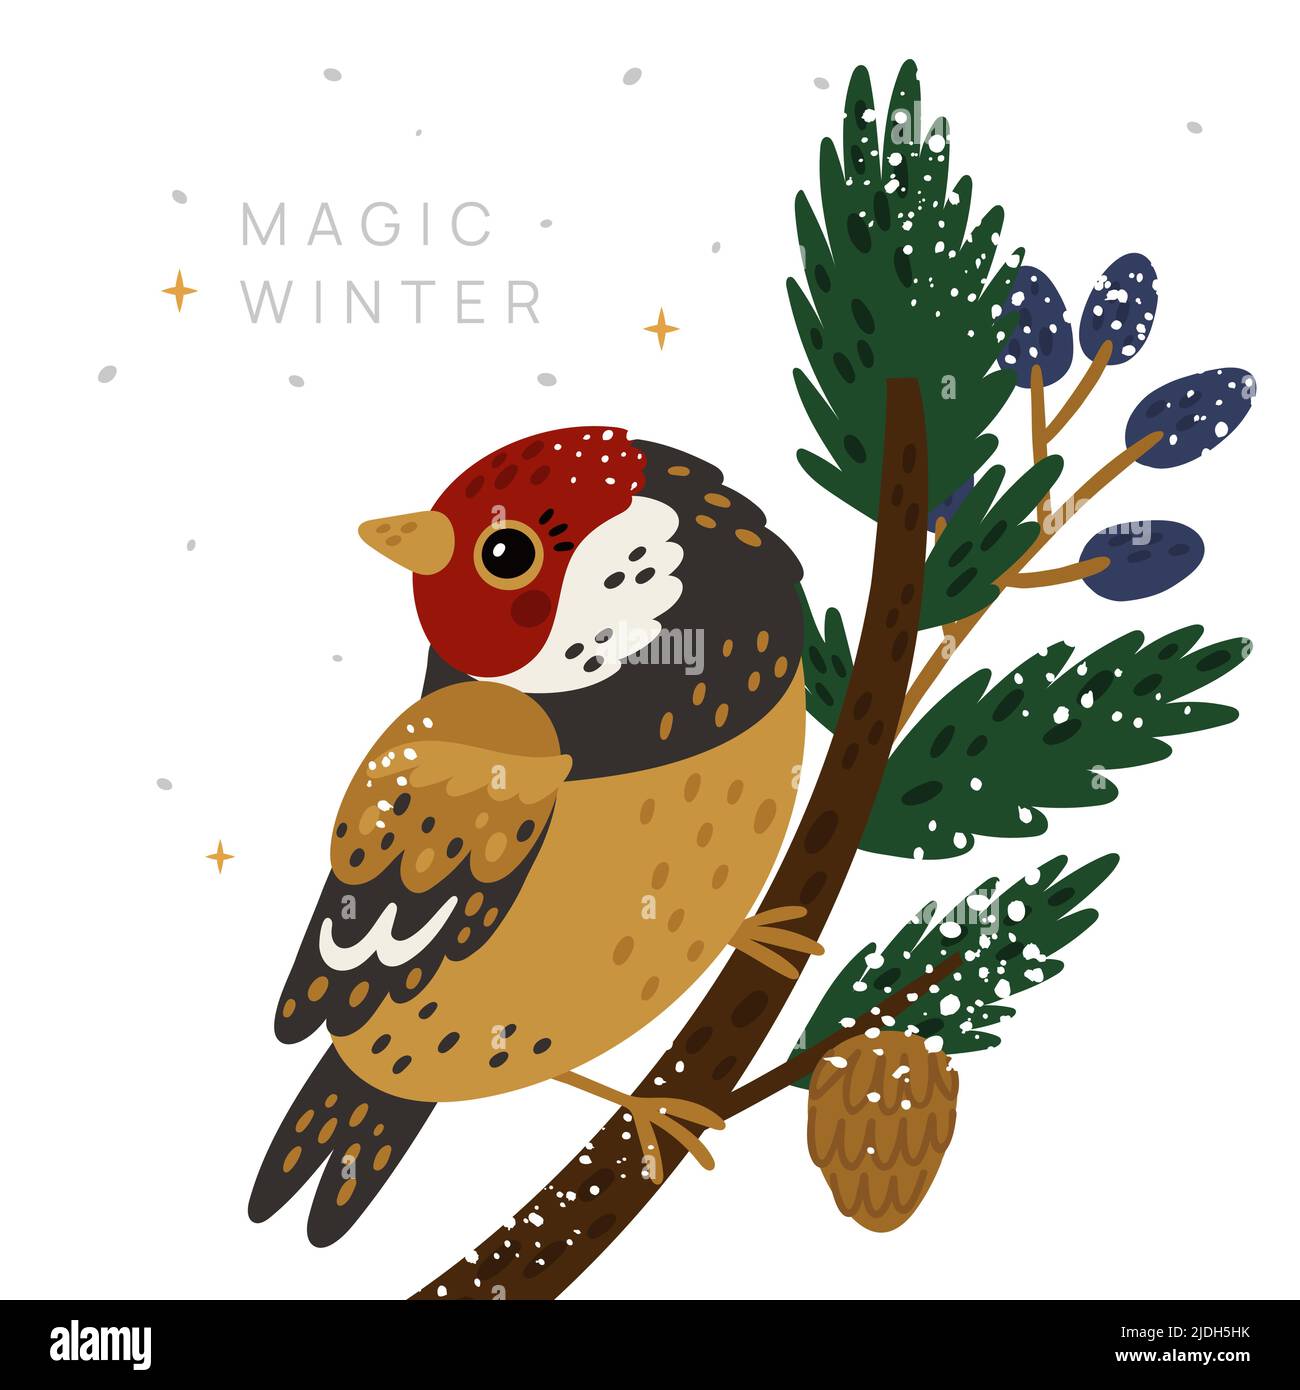 Magic winter card with goldfinch sitting on tree branch Stock Vector